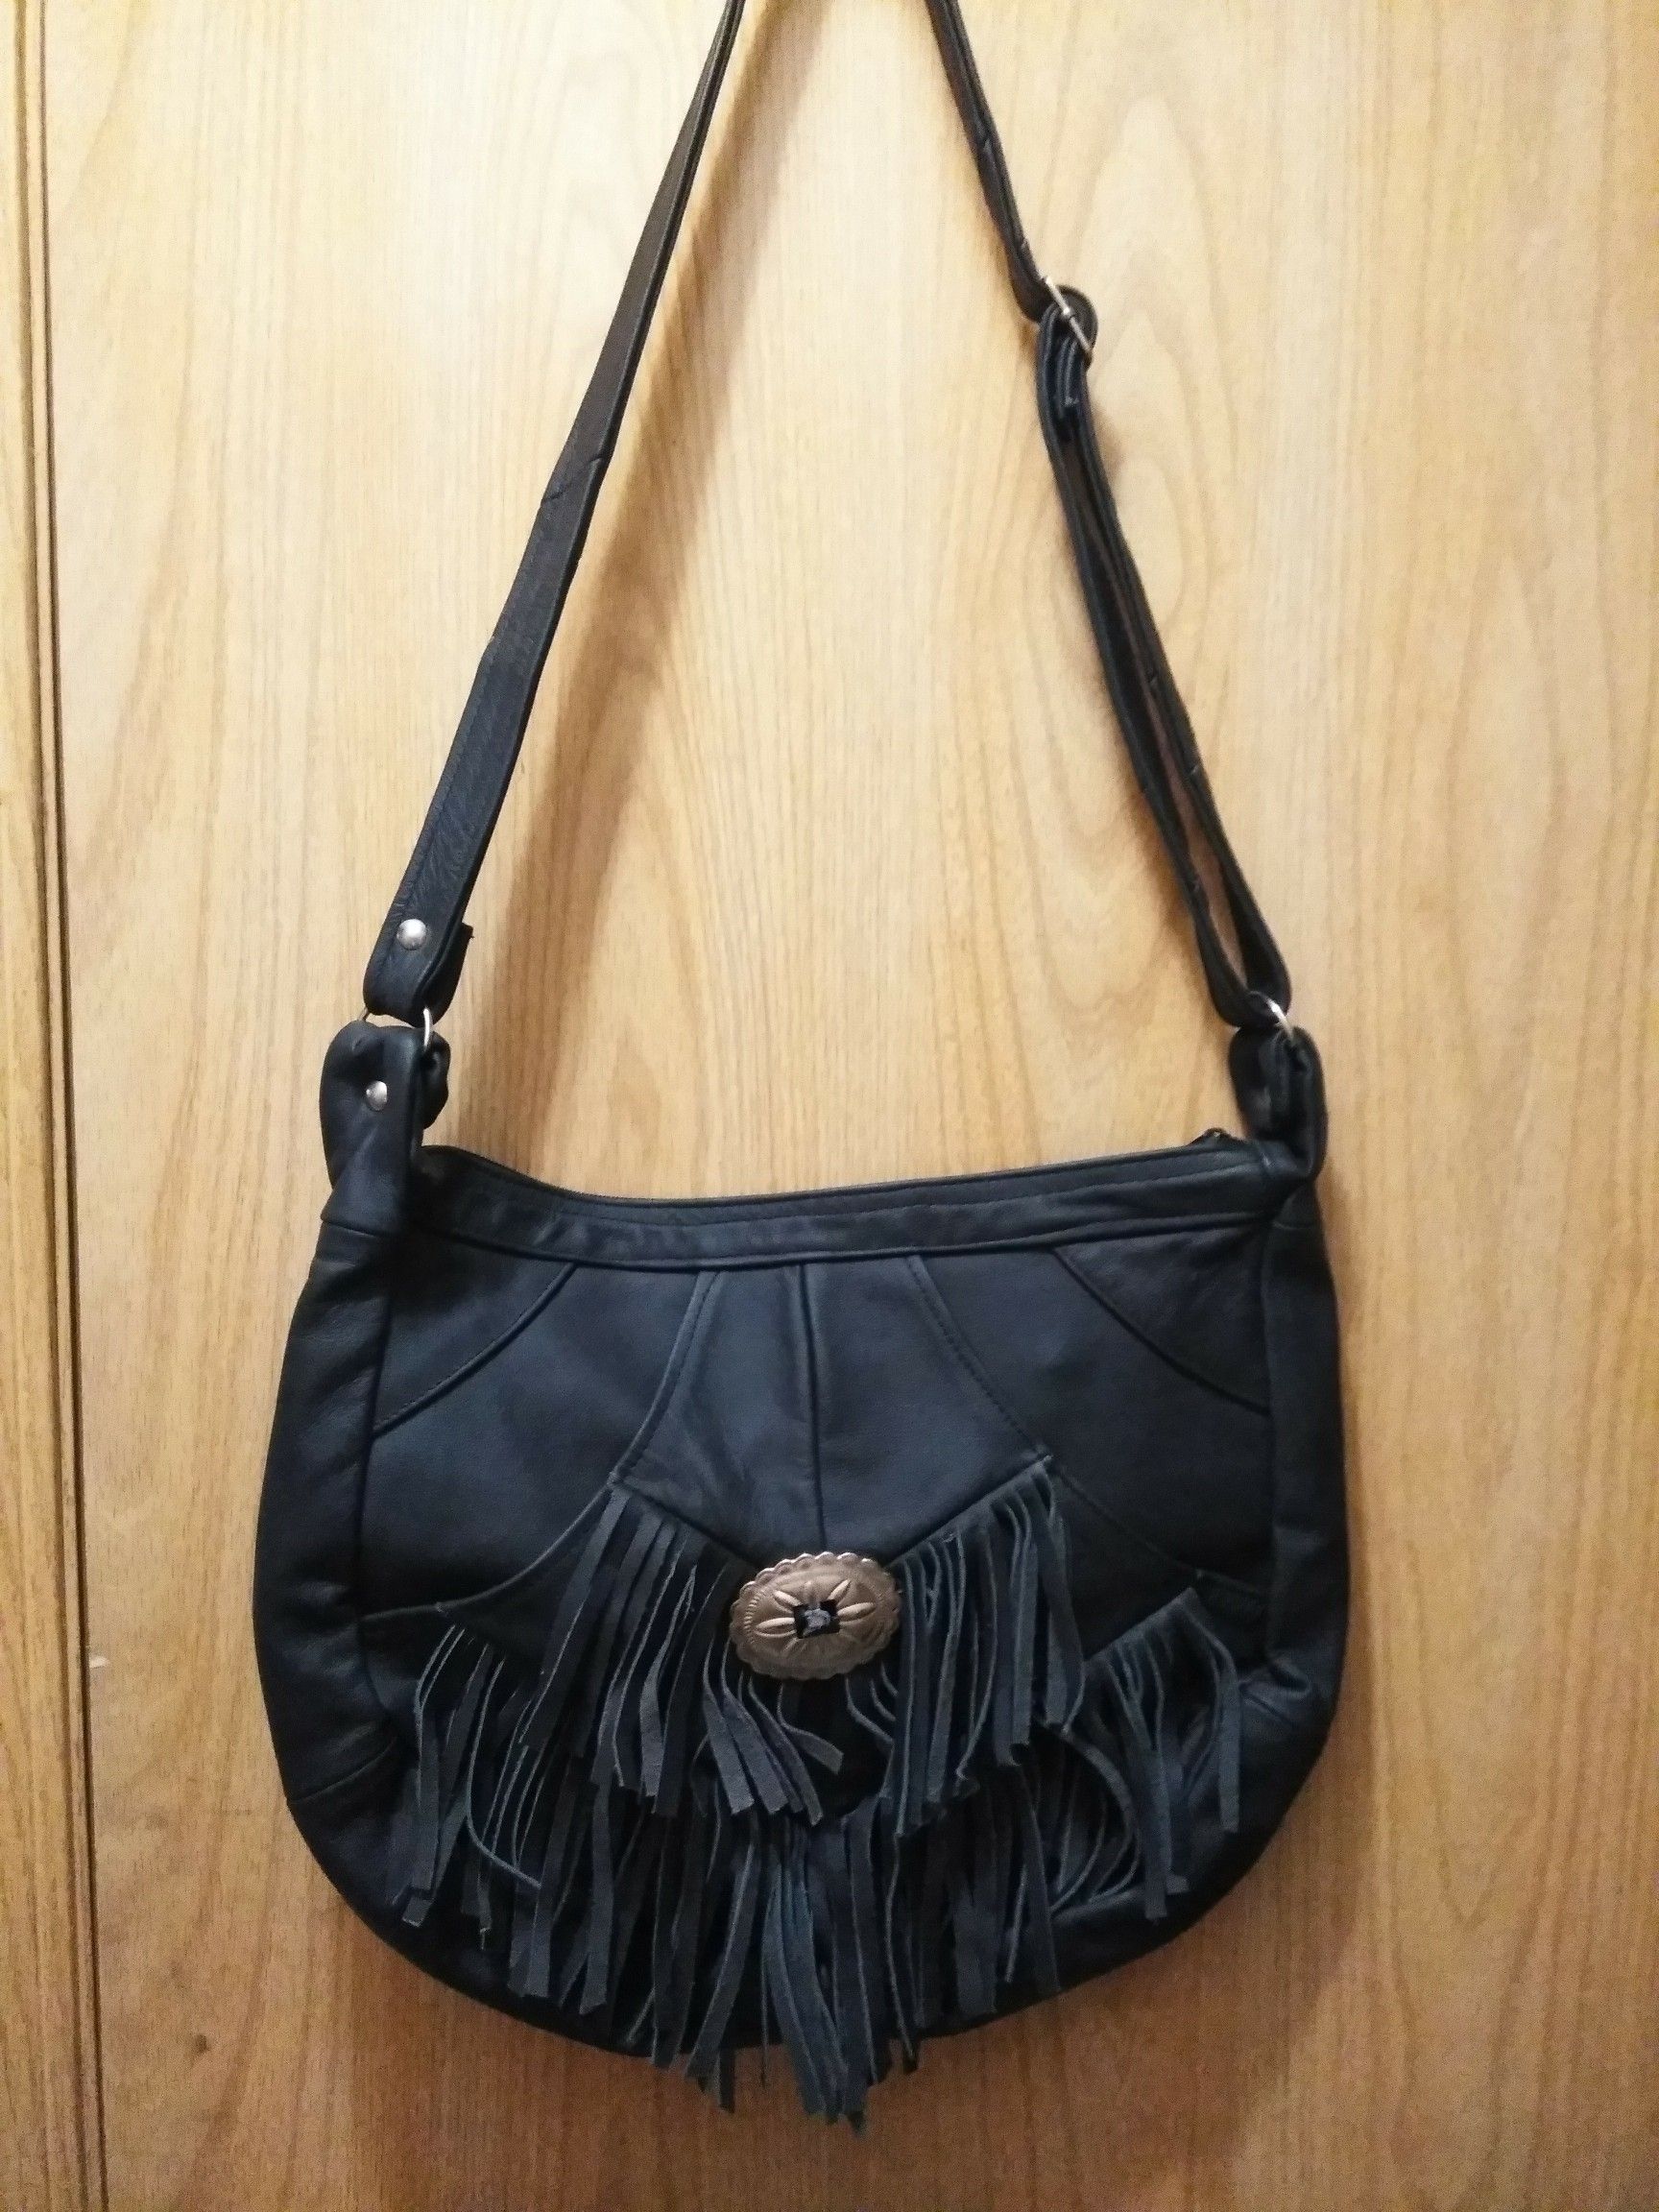 New Genuine Leather Western Style Hobo Purse Bag